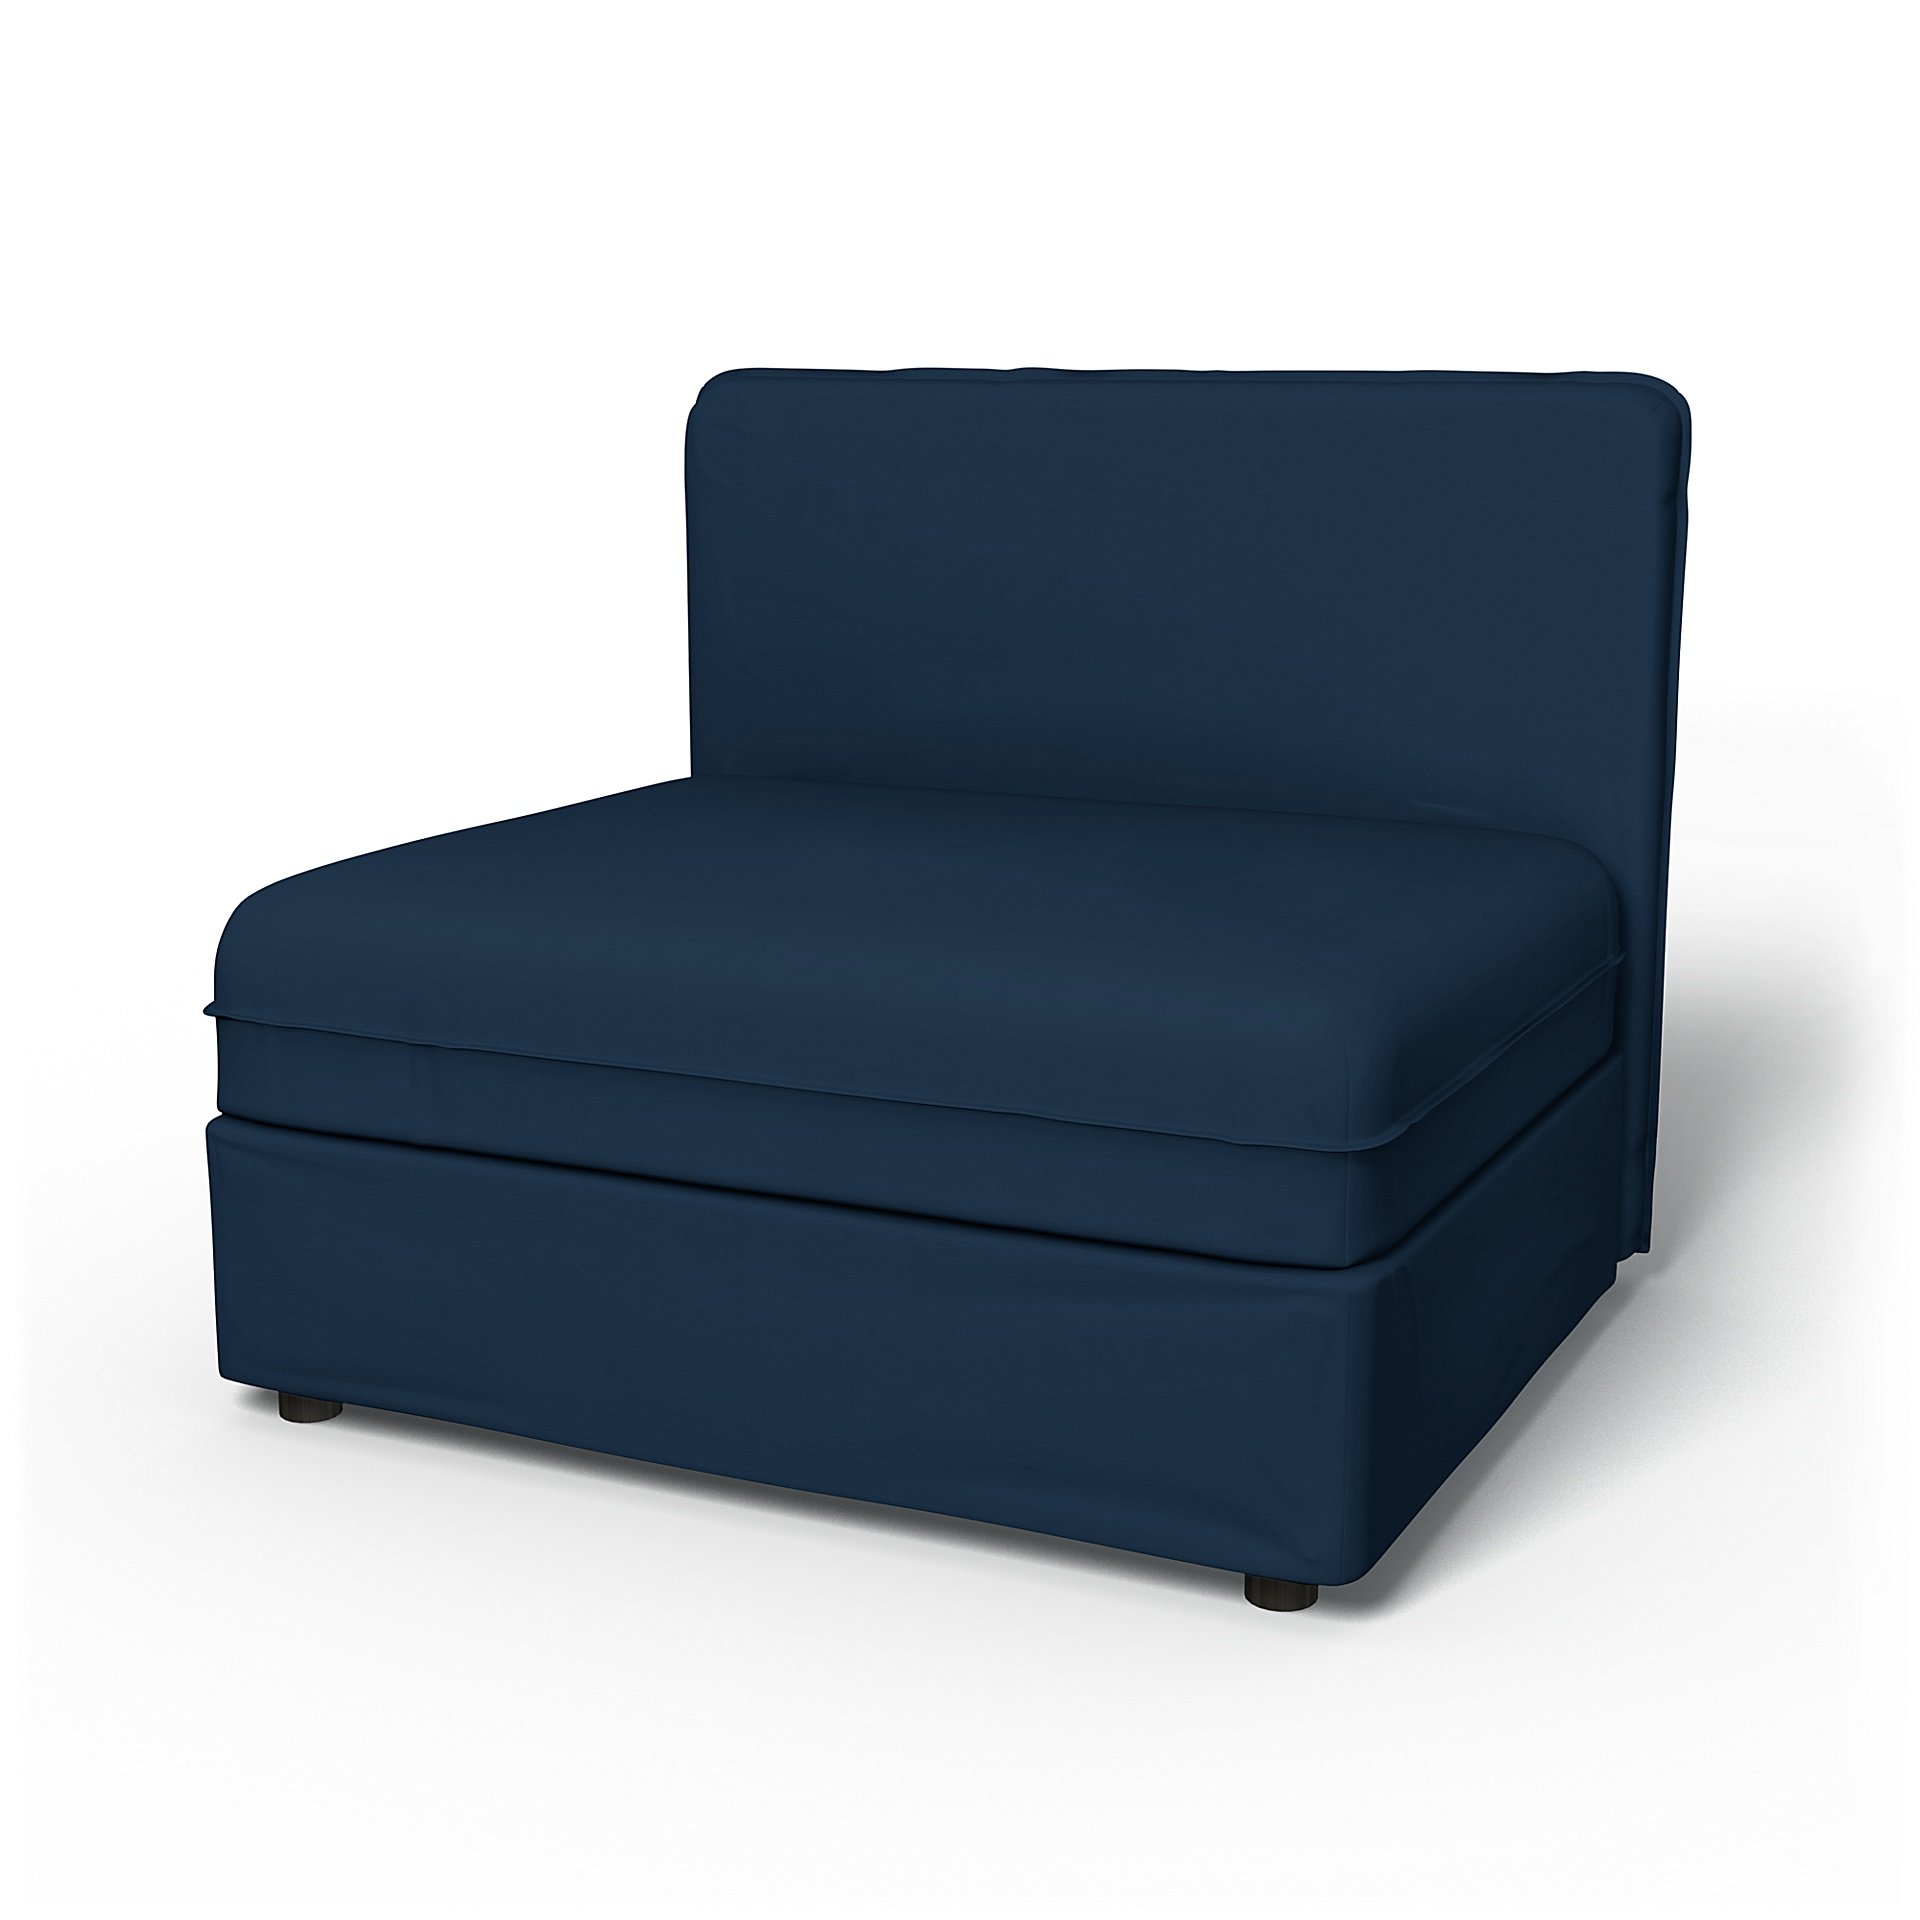 IKEA - Vallentuna Seat Module with Low Back Cover 100x80cm 39x32in, Deep Navy Blue, Cotton - Bemz